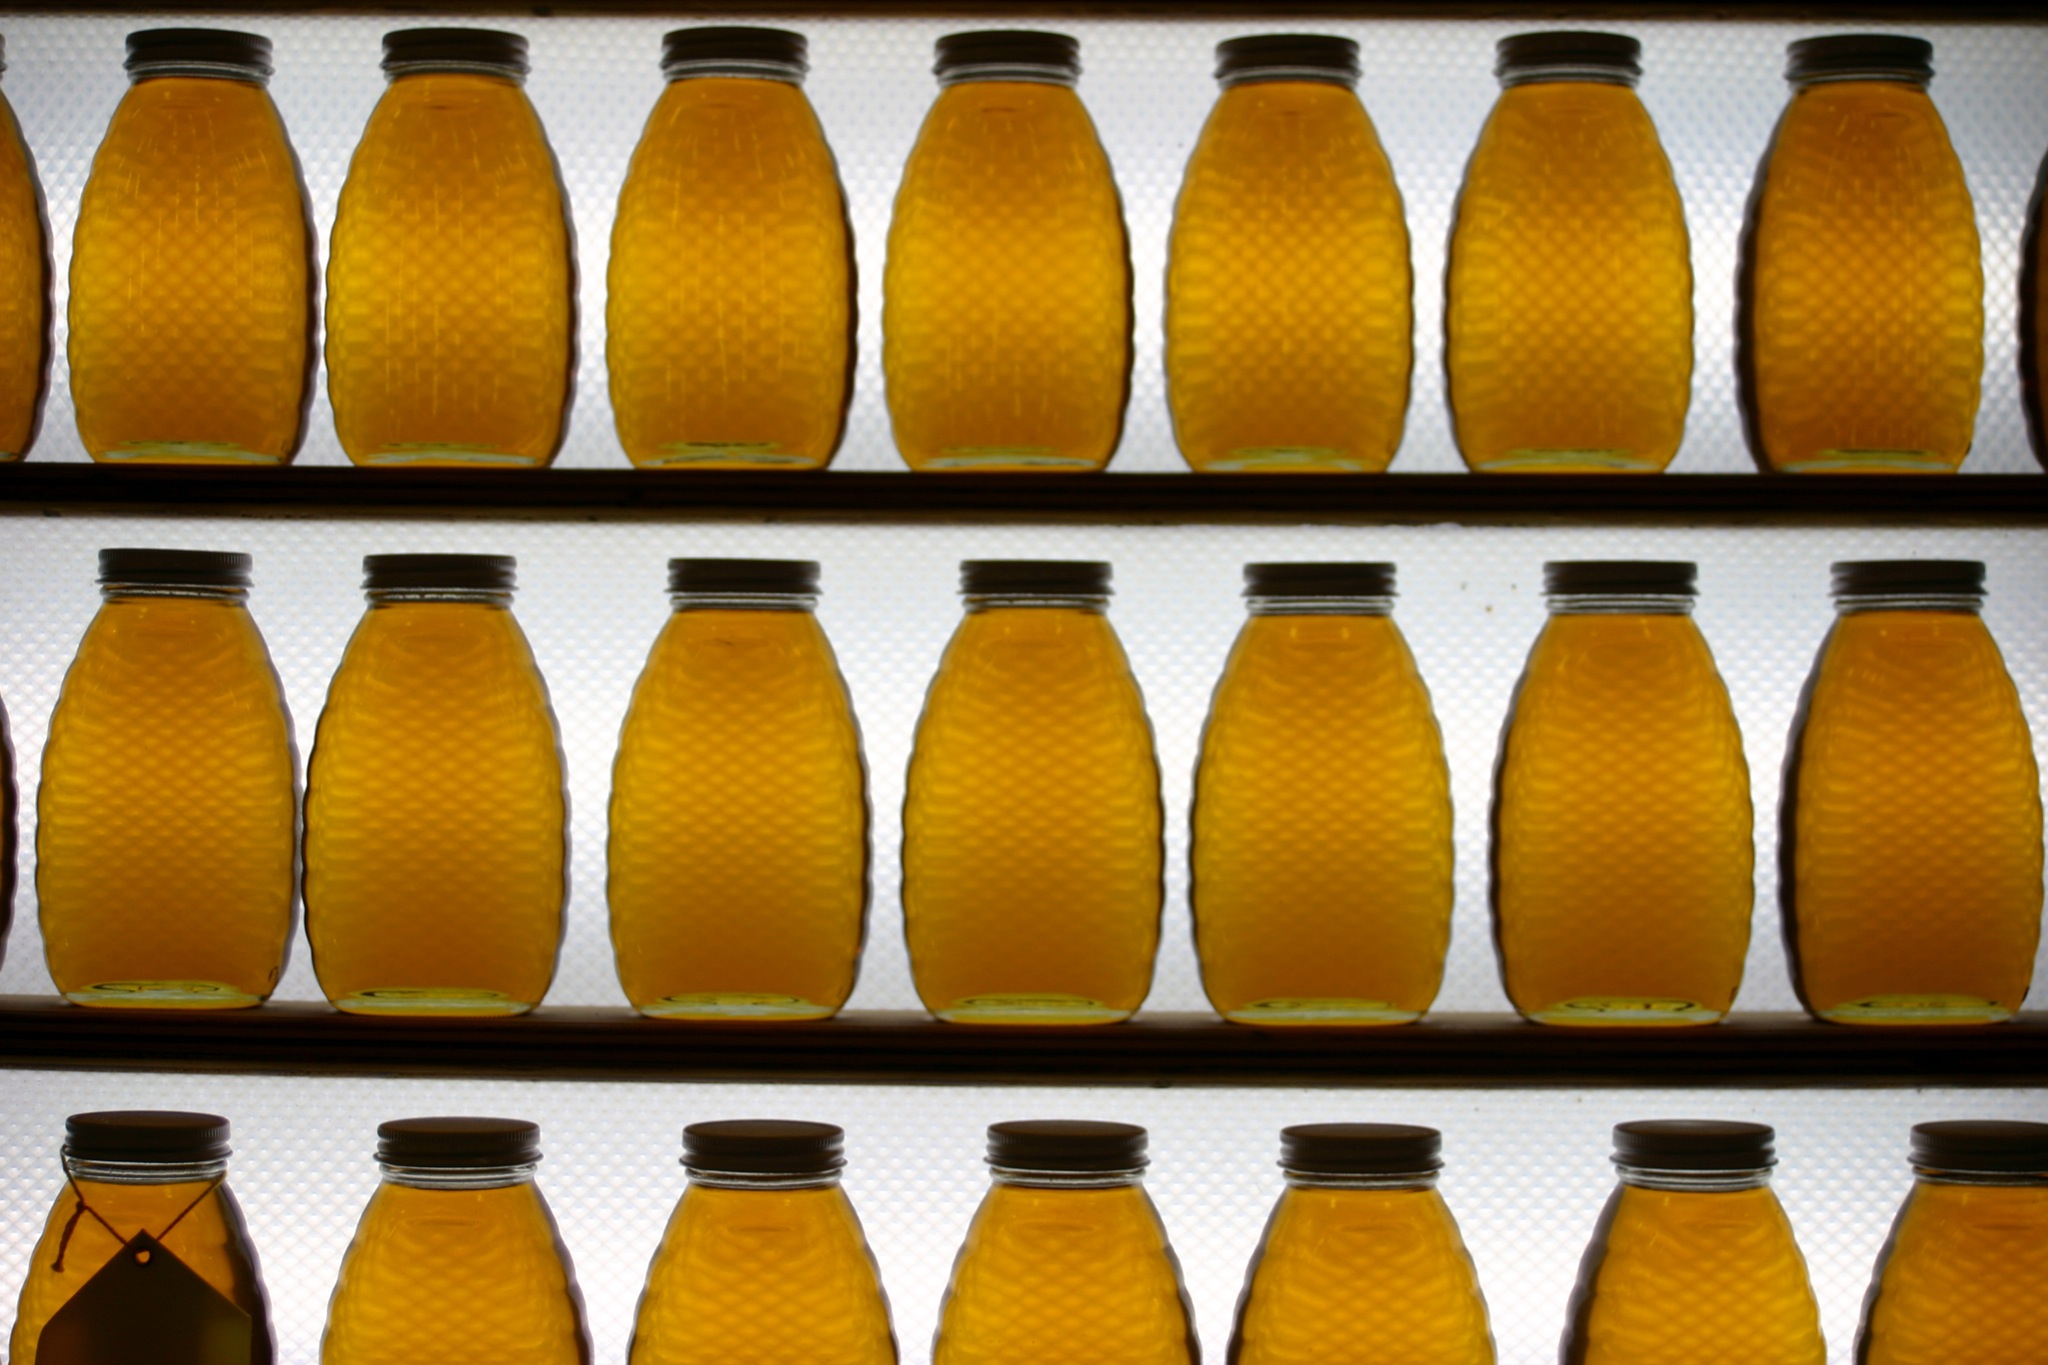 the bottles are lined up in rows with labels on them